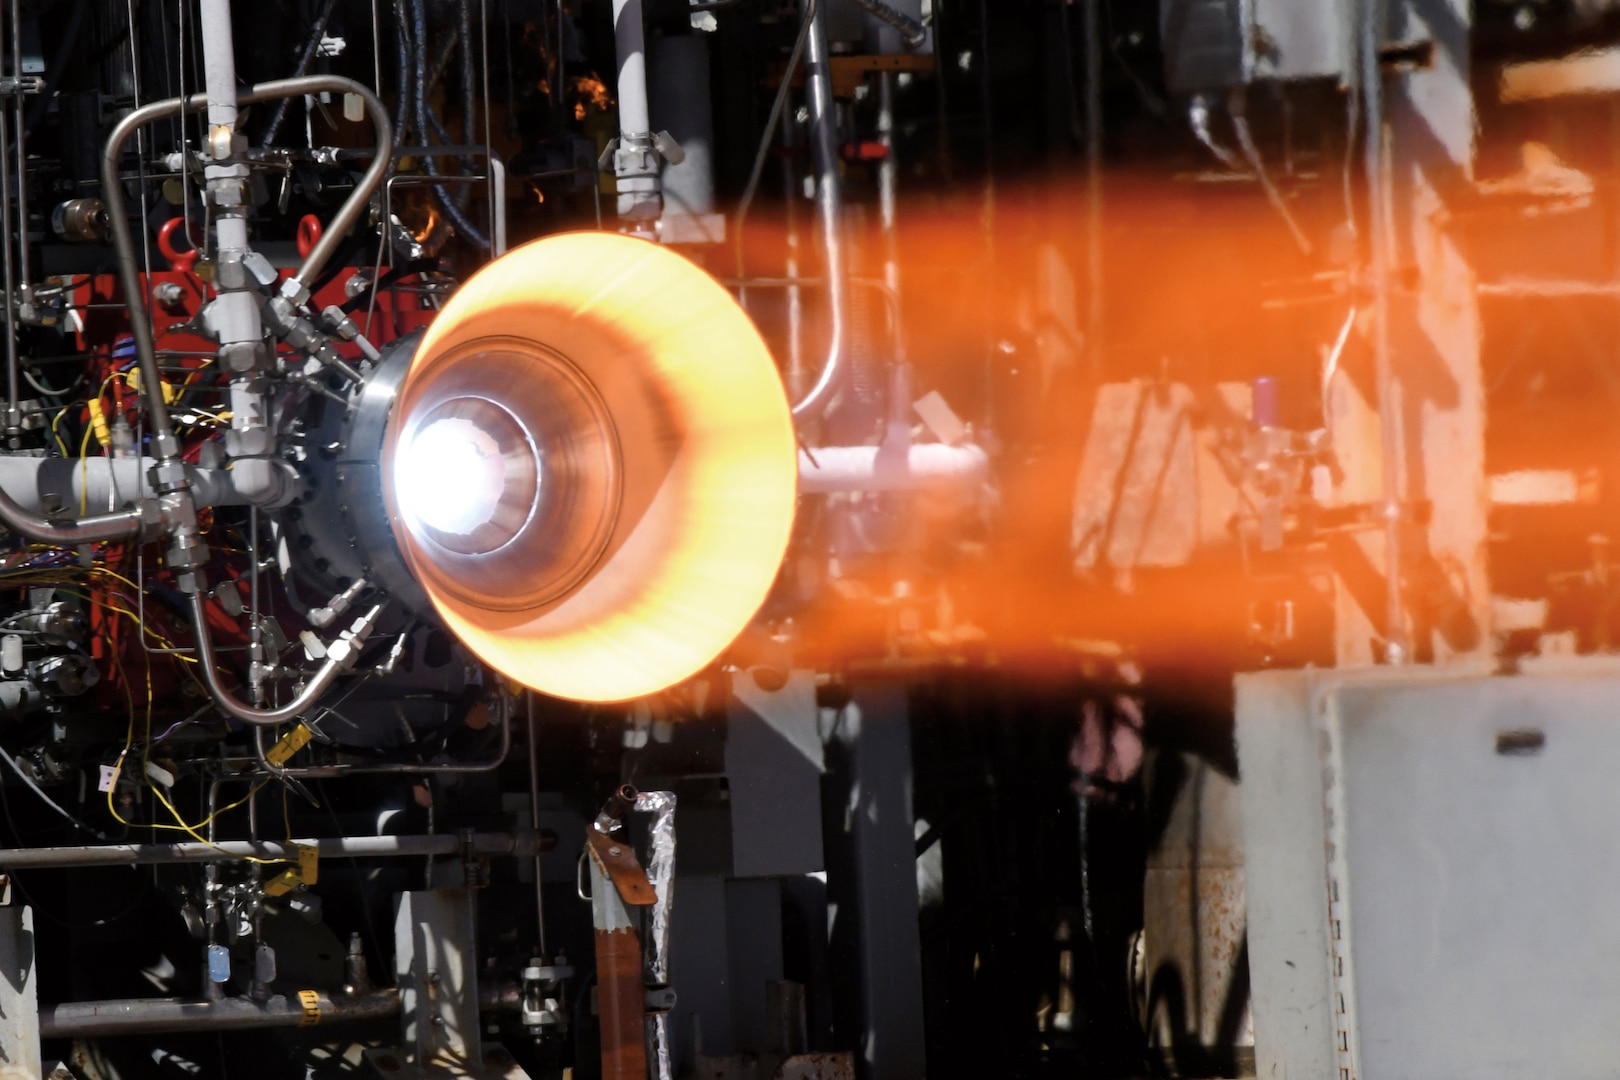 NASA successfully hot-fire tested 3D printed copper combustion chamber liner with E-Beam Free Form Fabrication manufactured nickel-alloy jacket, March 2, 2018 (NASA/Marshall Space Flight Center/David Olive)